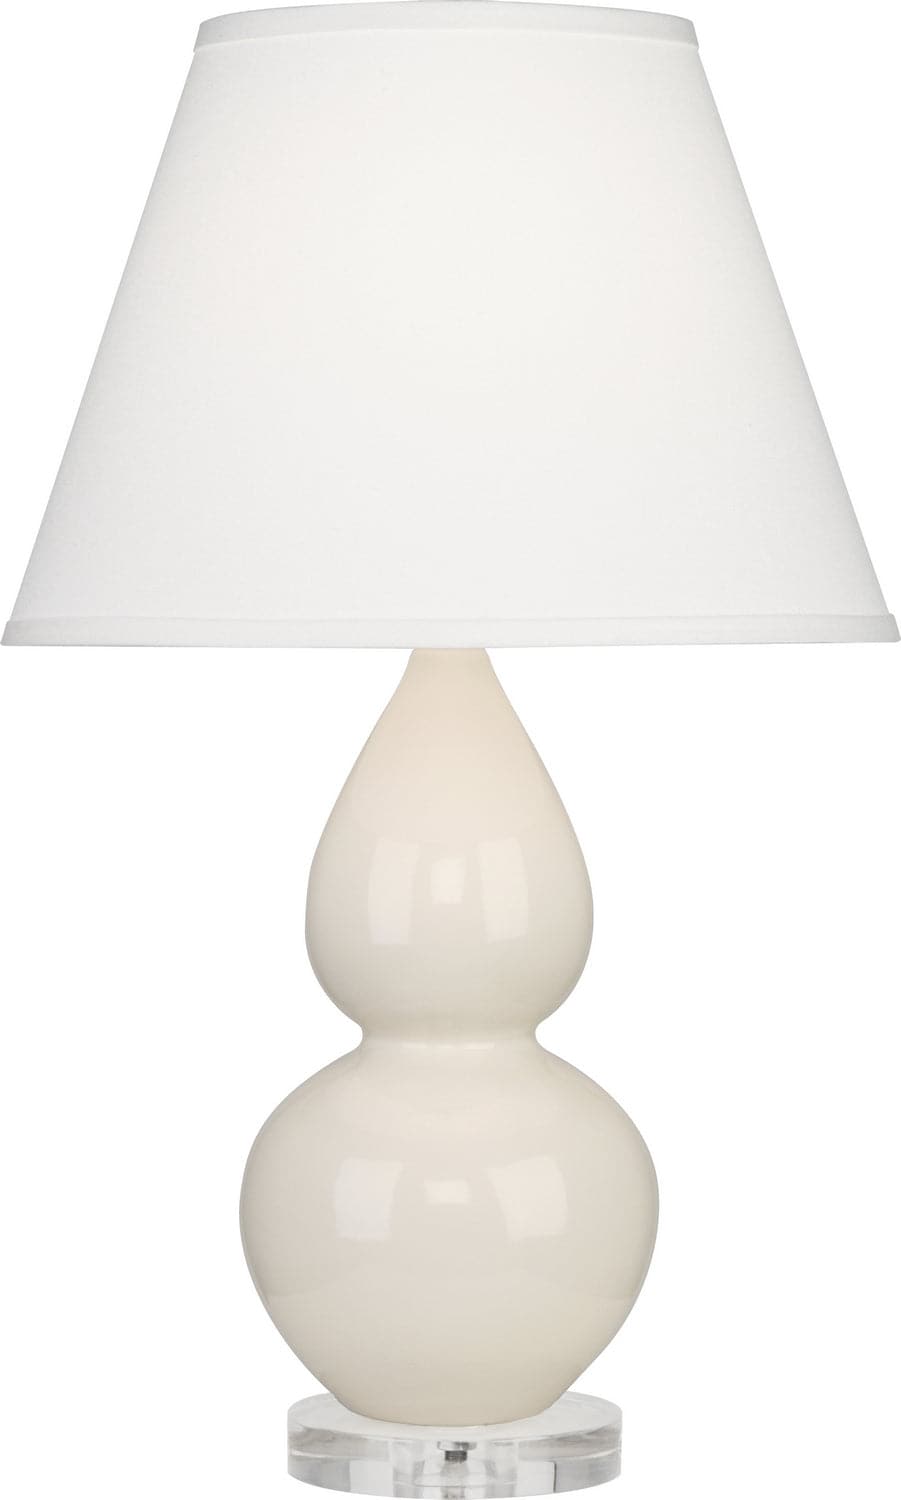 Robert Abbey - A776X - One Light Accent Lamp - Small Double Gourd - Bone Glazed w/Lucite Base